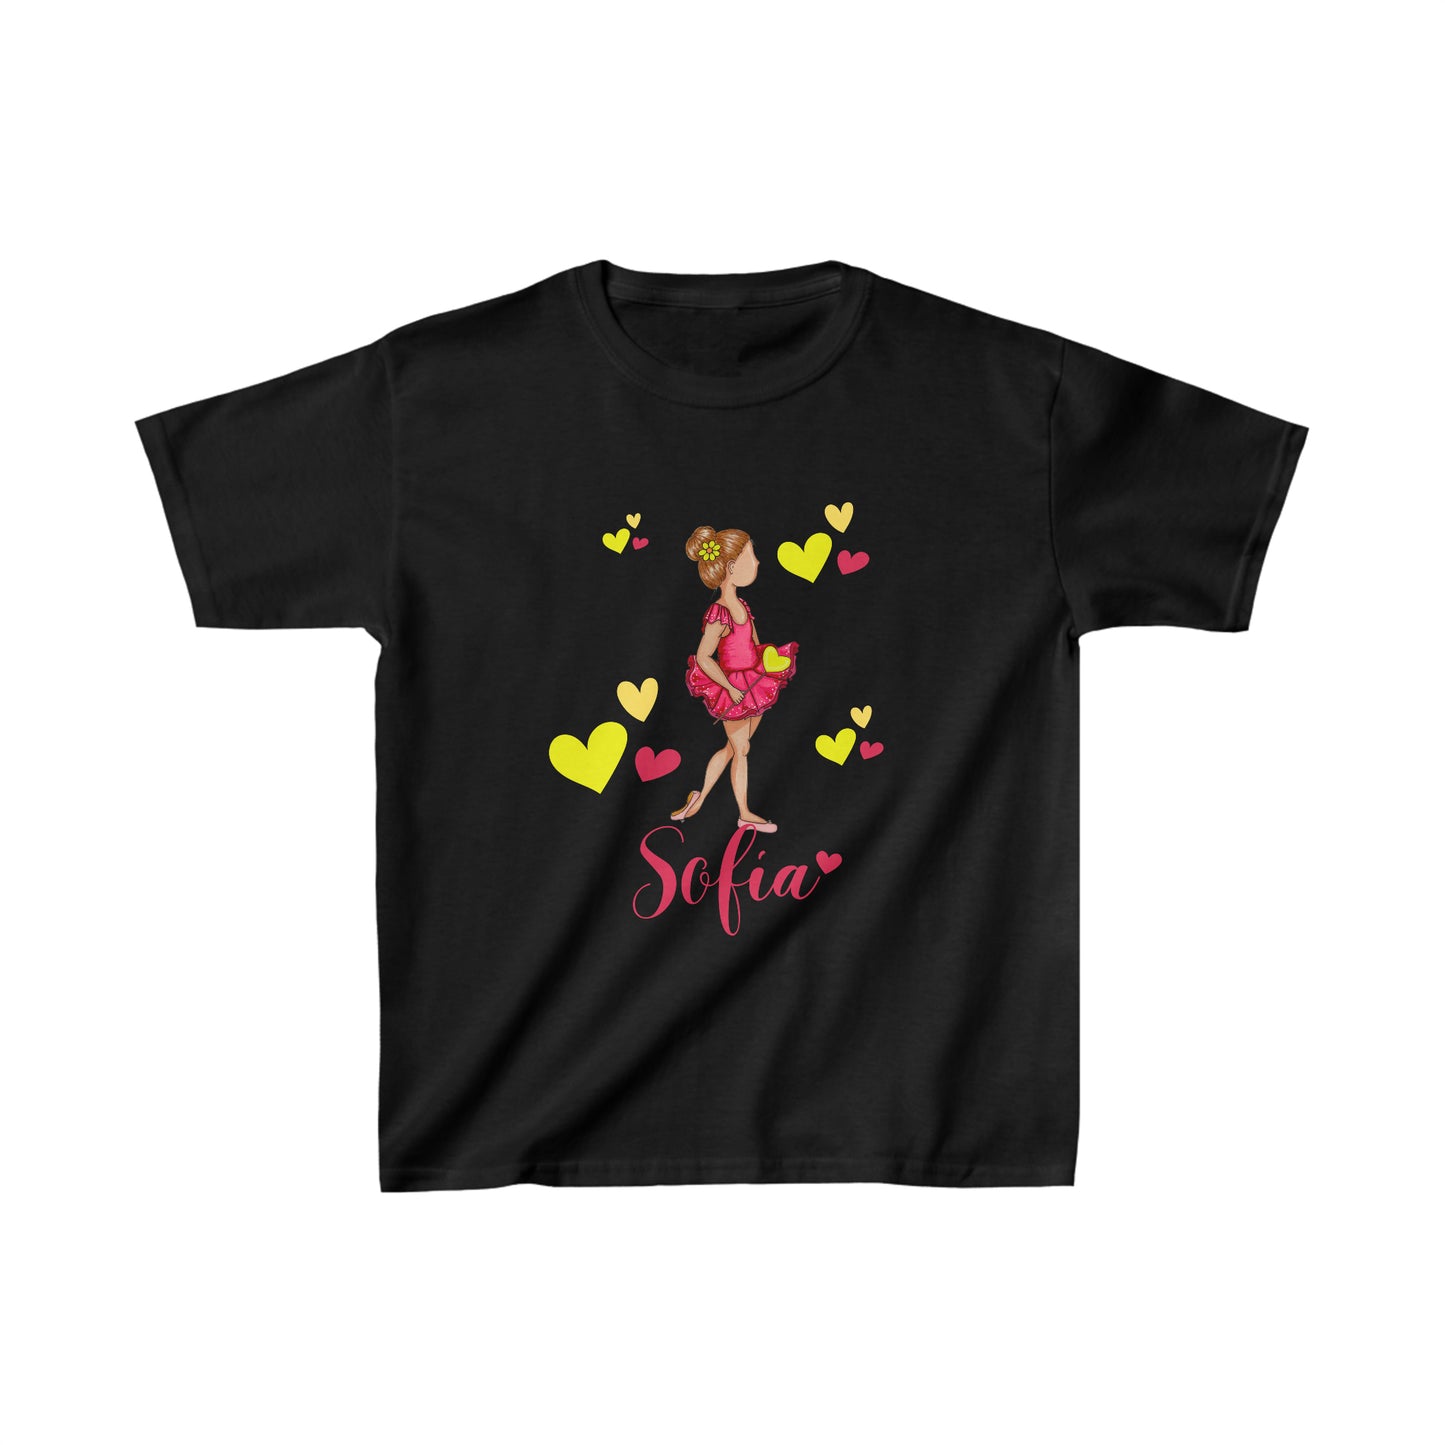 a black t - shirt with a girl in a pink dress and hearts